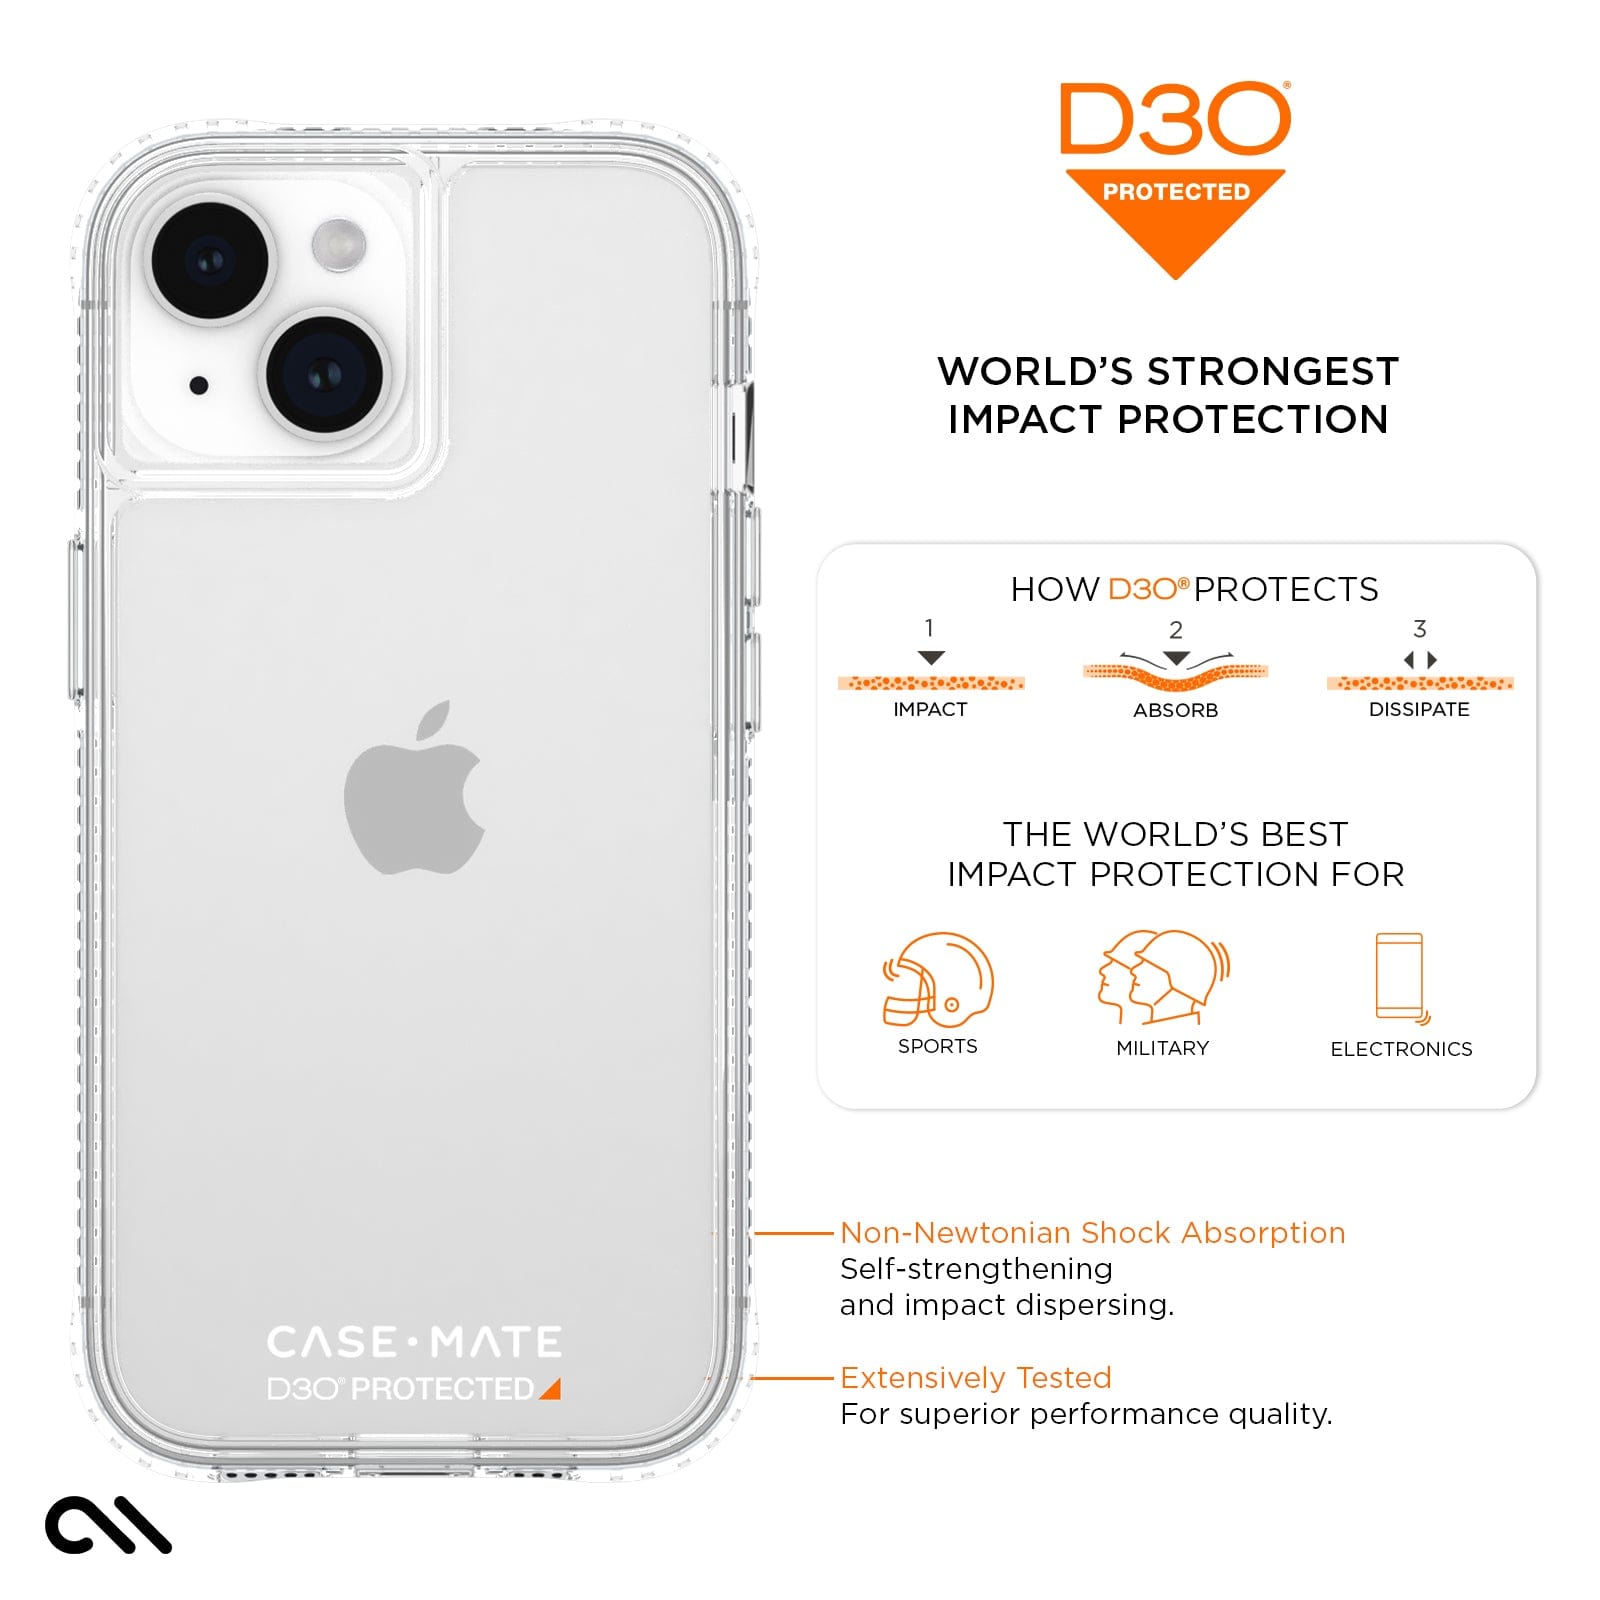 D3O WORLDS STRONGEST IMPACT PROTECTION